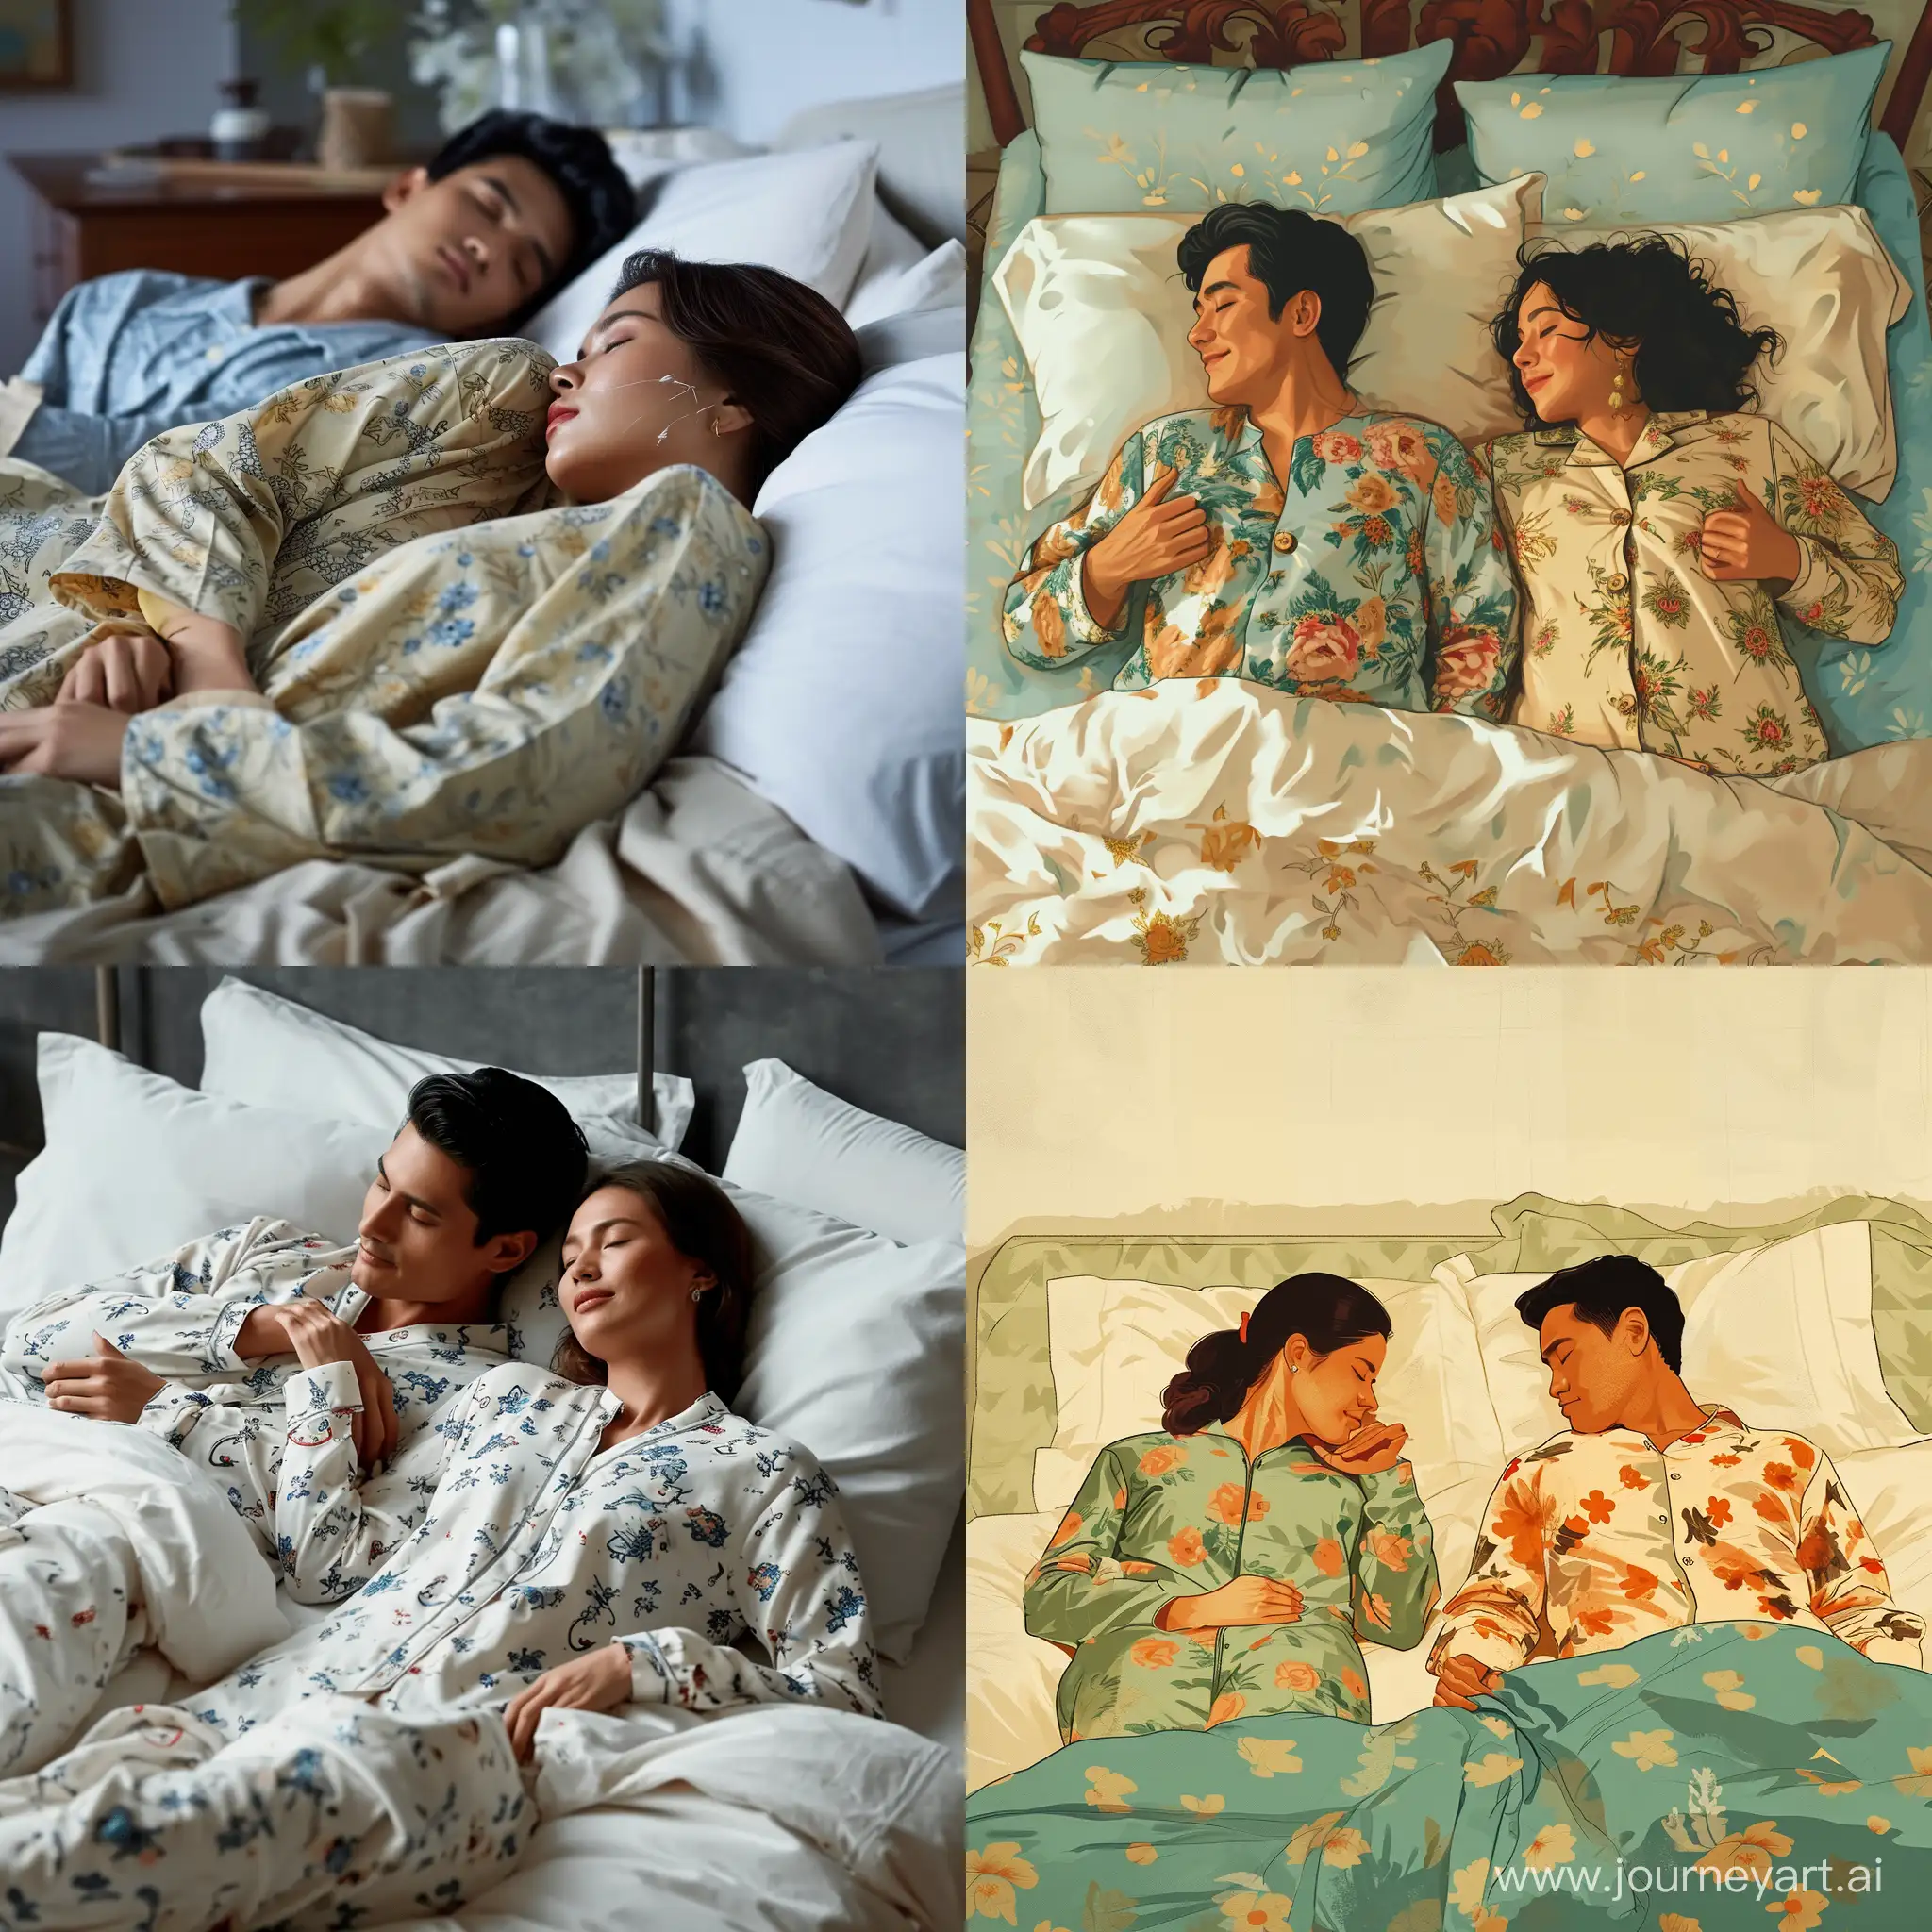 Cozy-Indonesian-Couples-Sleeping-in-Matching-Pajamas